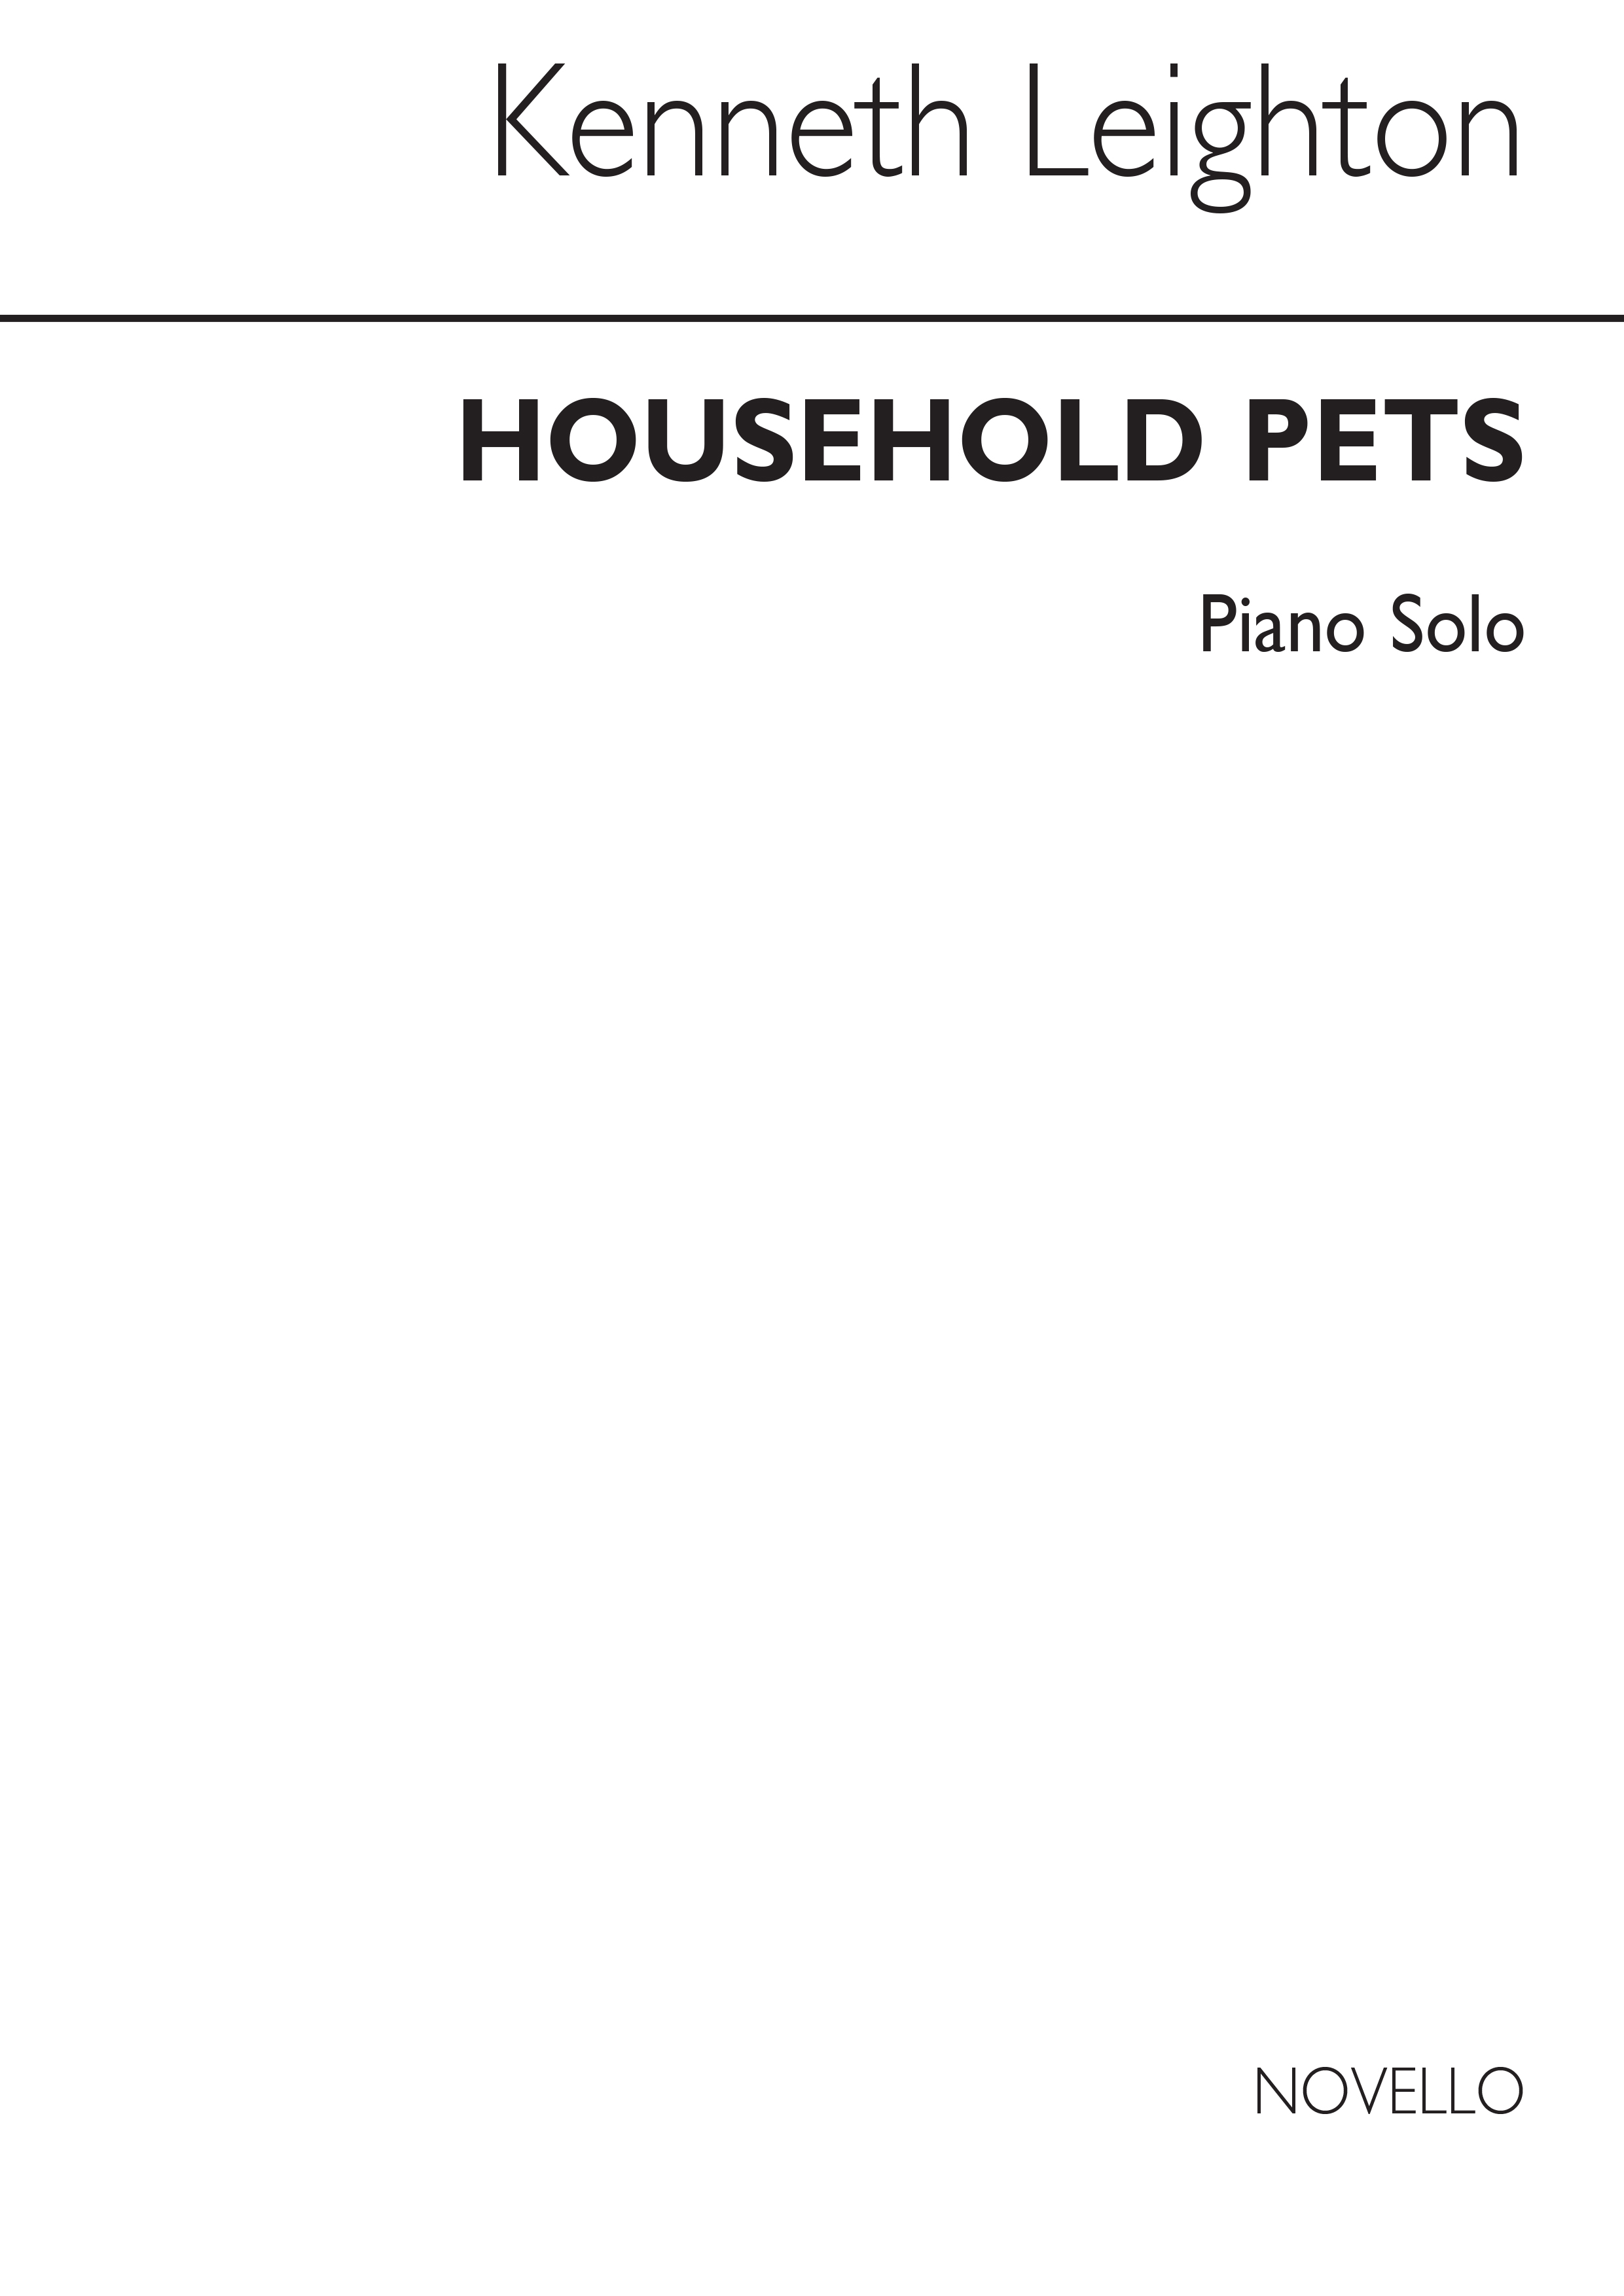 Kenneth Leighton: Household Pets for Piano Op.86